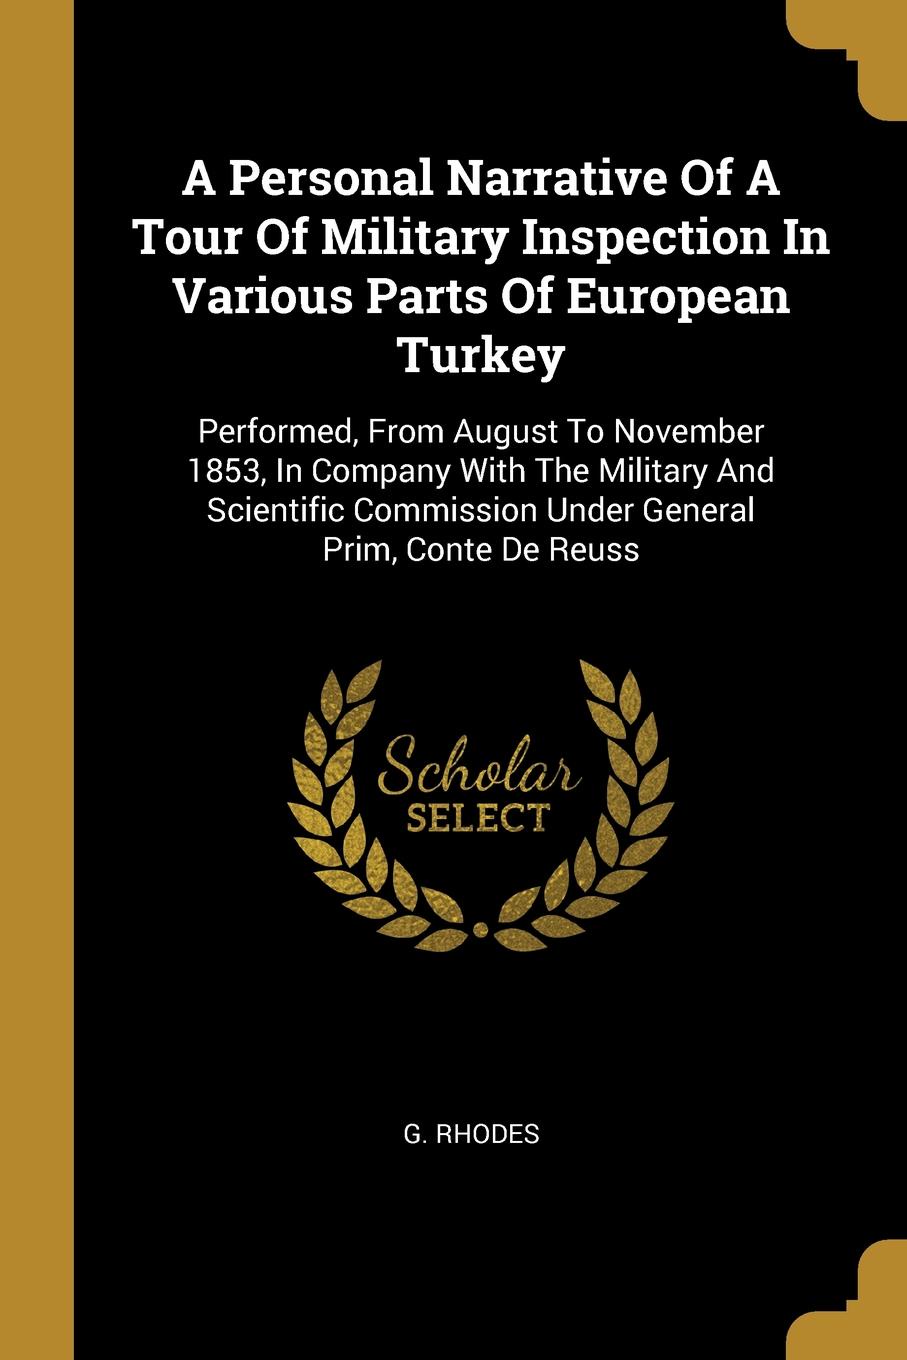 A Personal Narrative Of A Tour Of Military Inspection In Various Parts Of European Turkey. Performed, From August To November 1853, In Company With The Military And Scientific Commission Under General Prim, Conte De Reuss